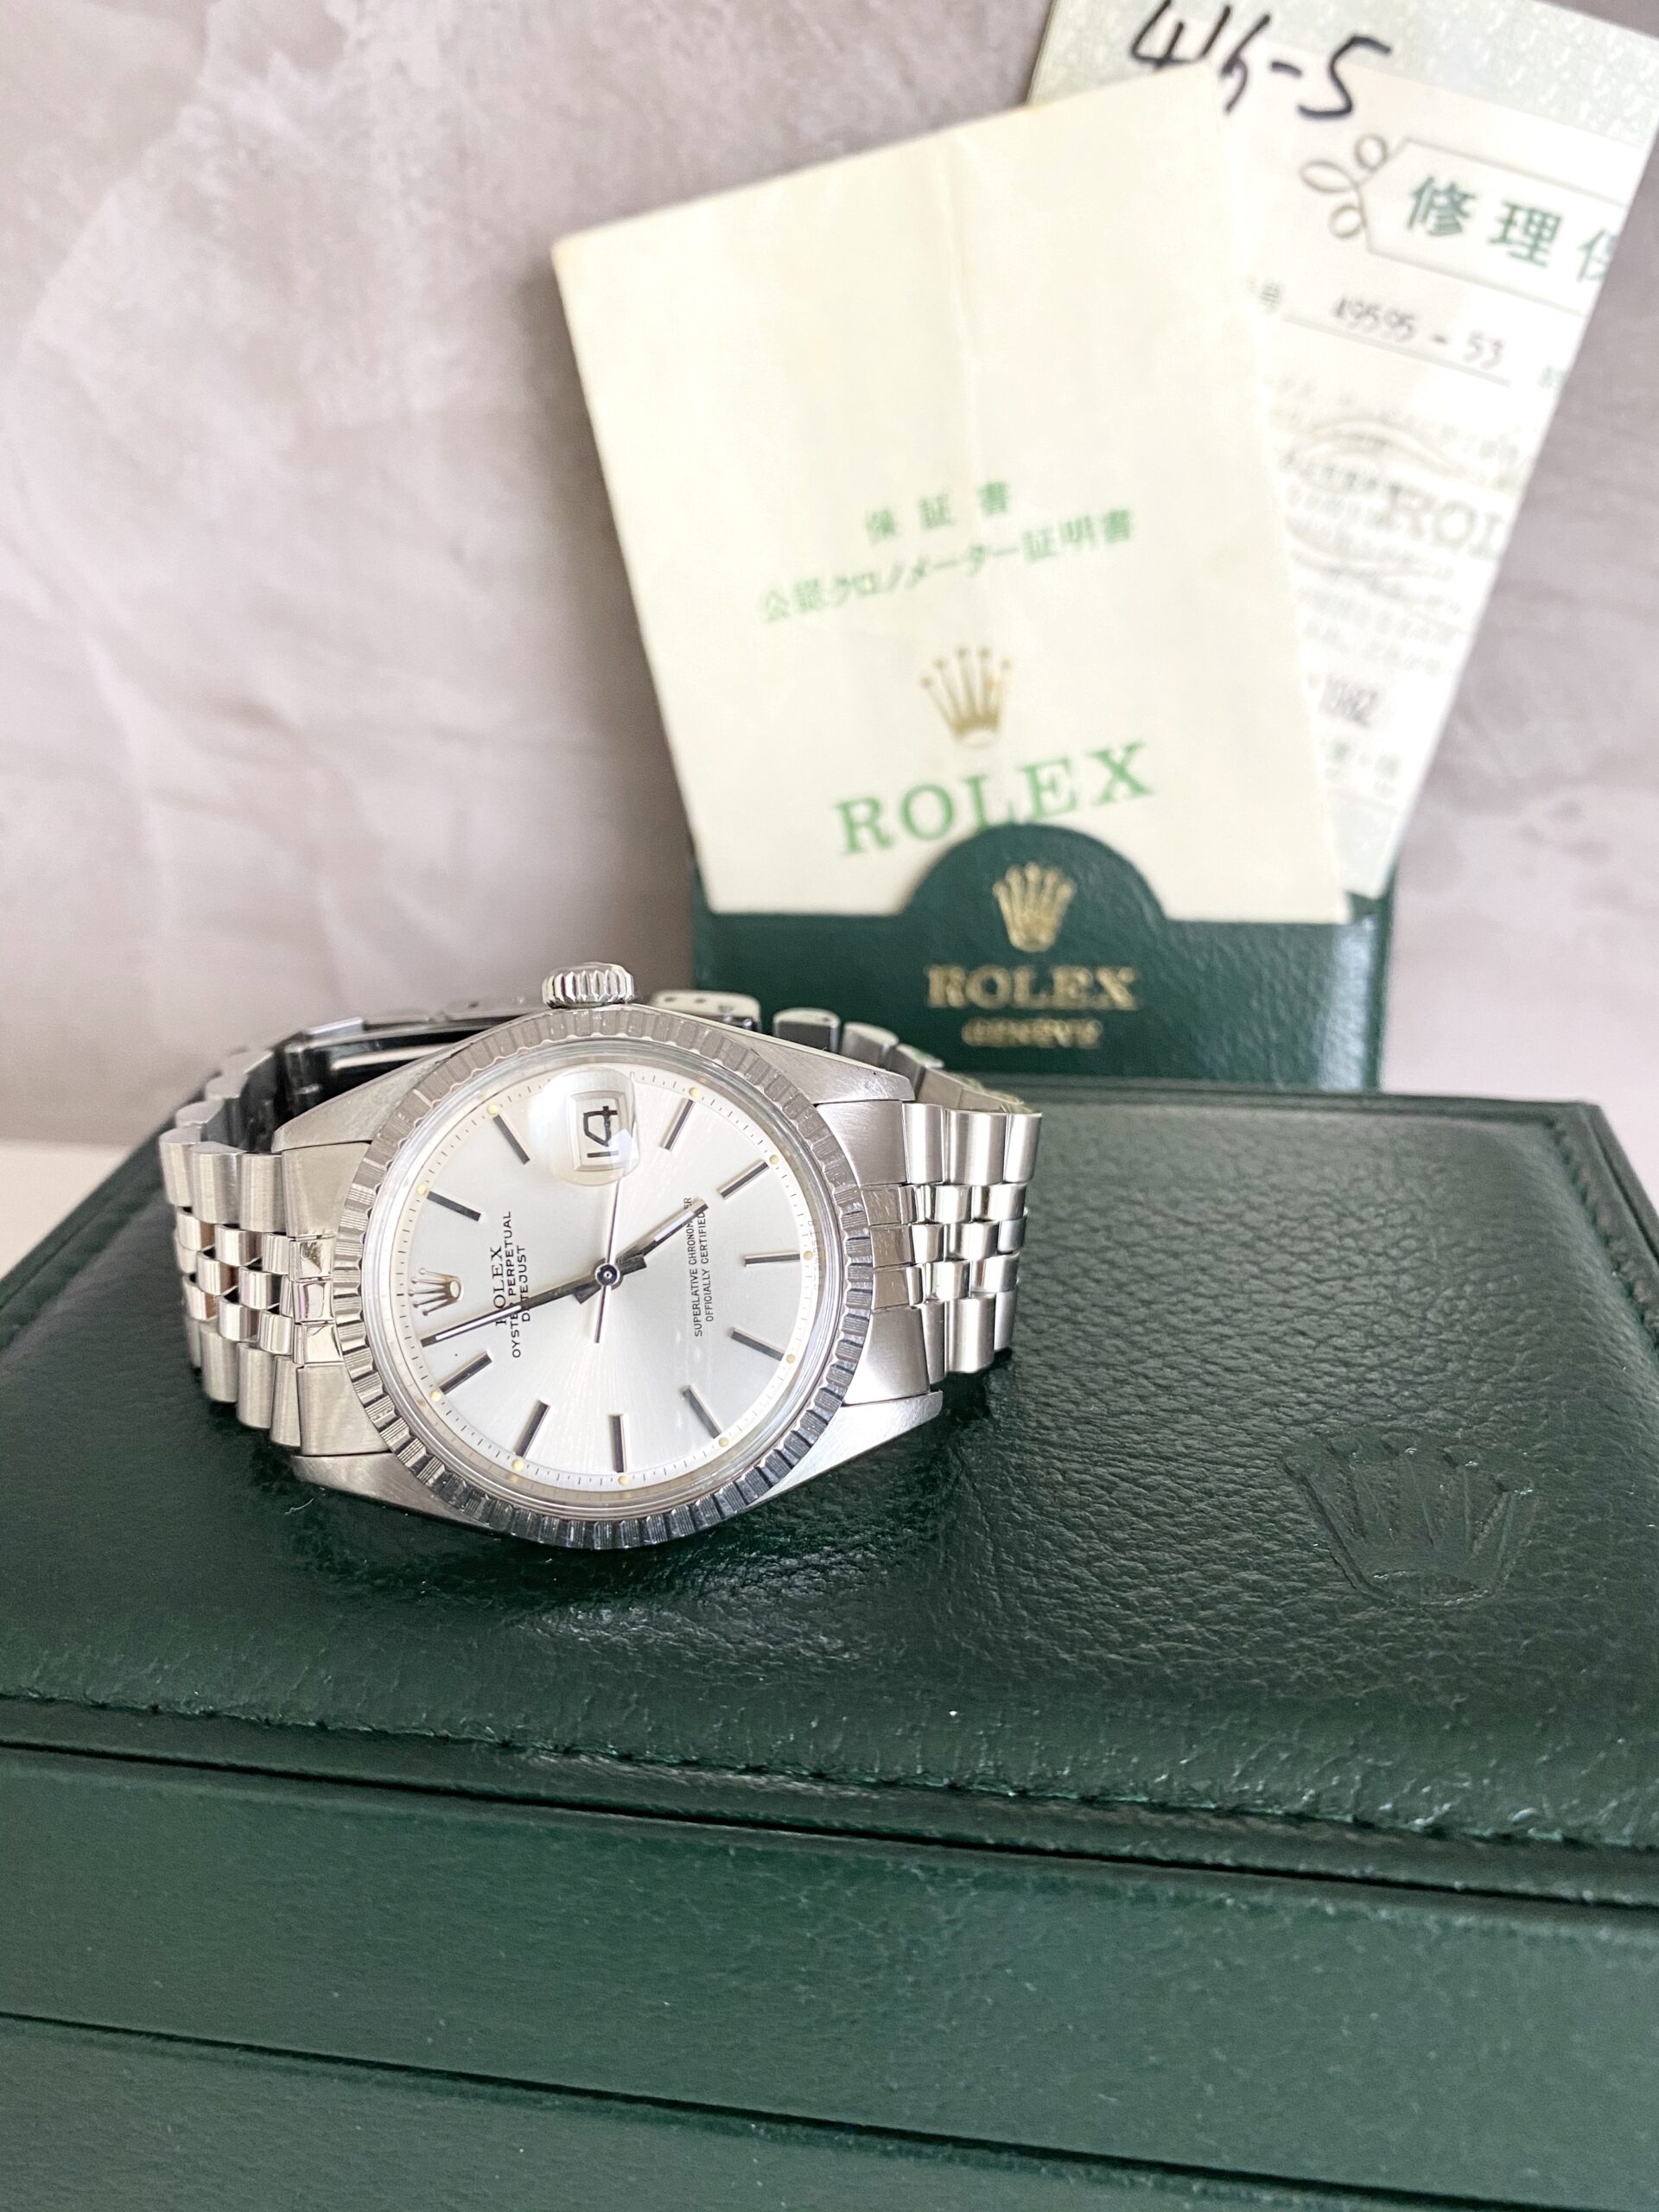 Vintage Rolex Datejust ref. 1603 dial | The Doc Watches